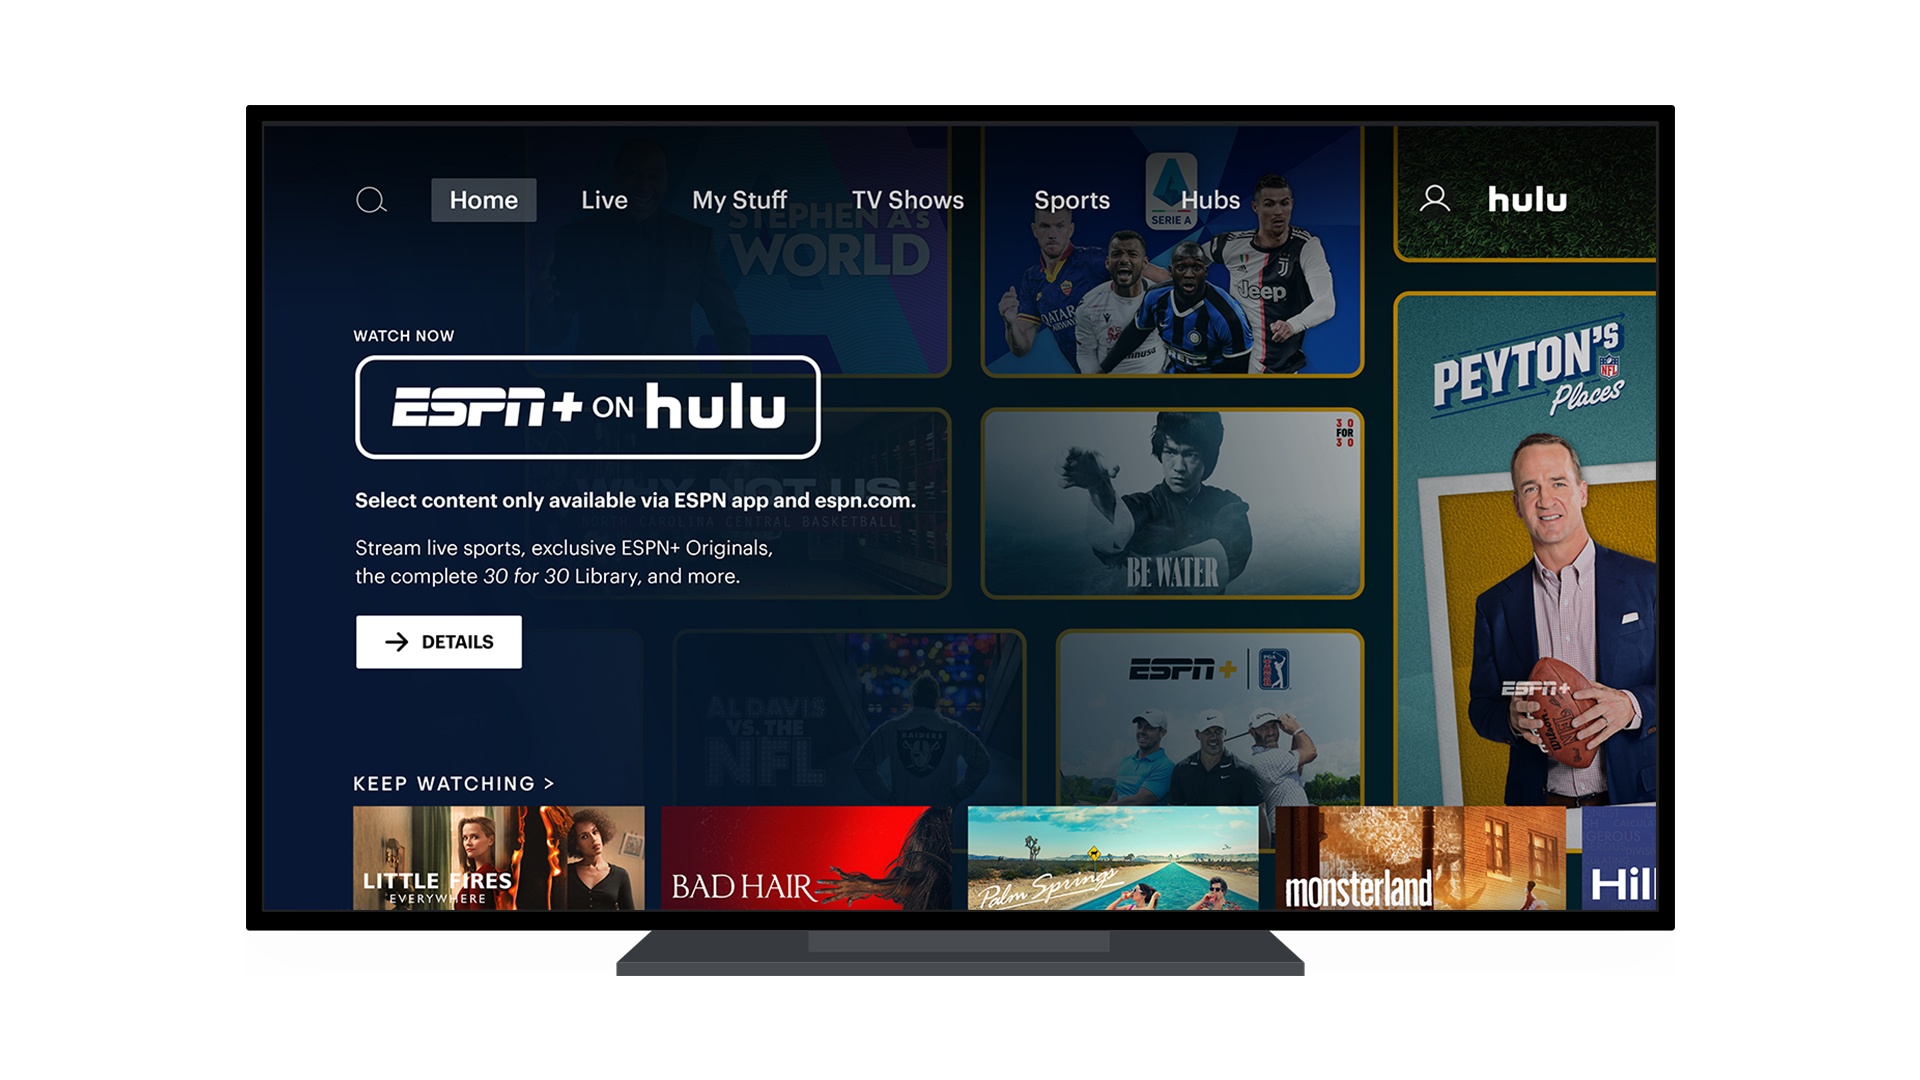 ESPN+ Content is Now Available Through Hulu